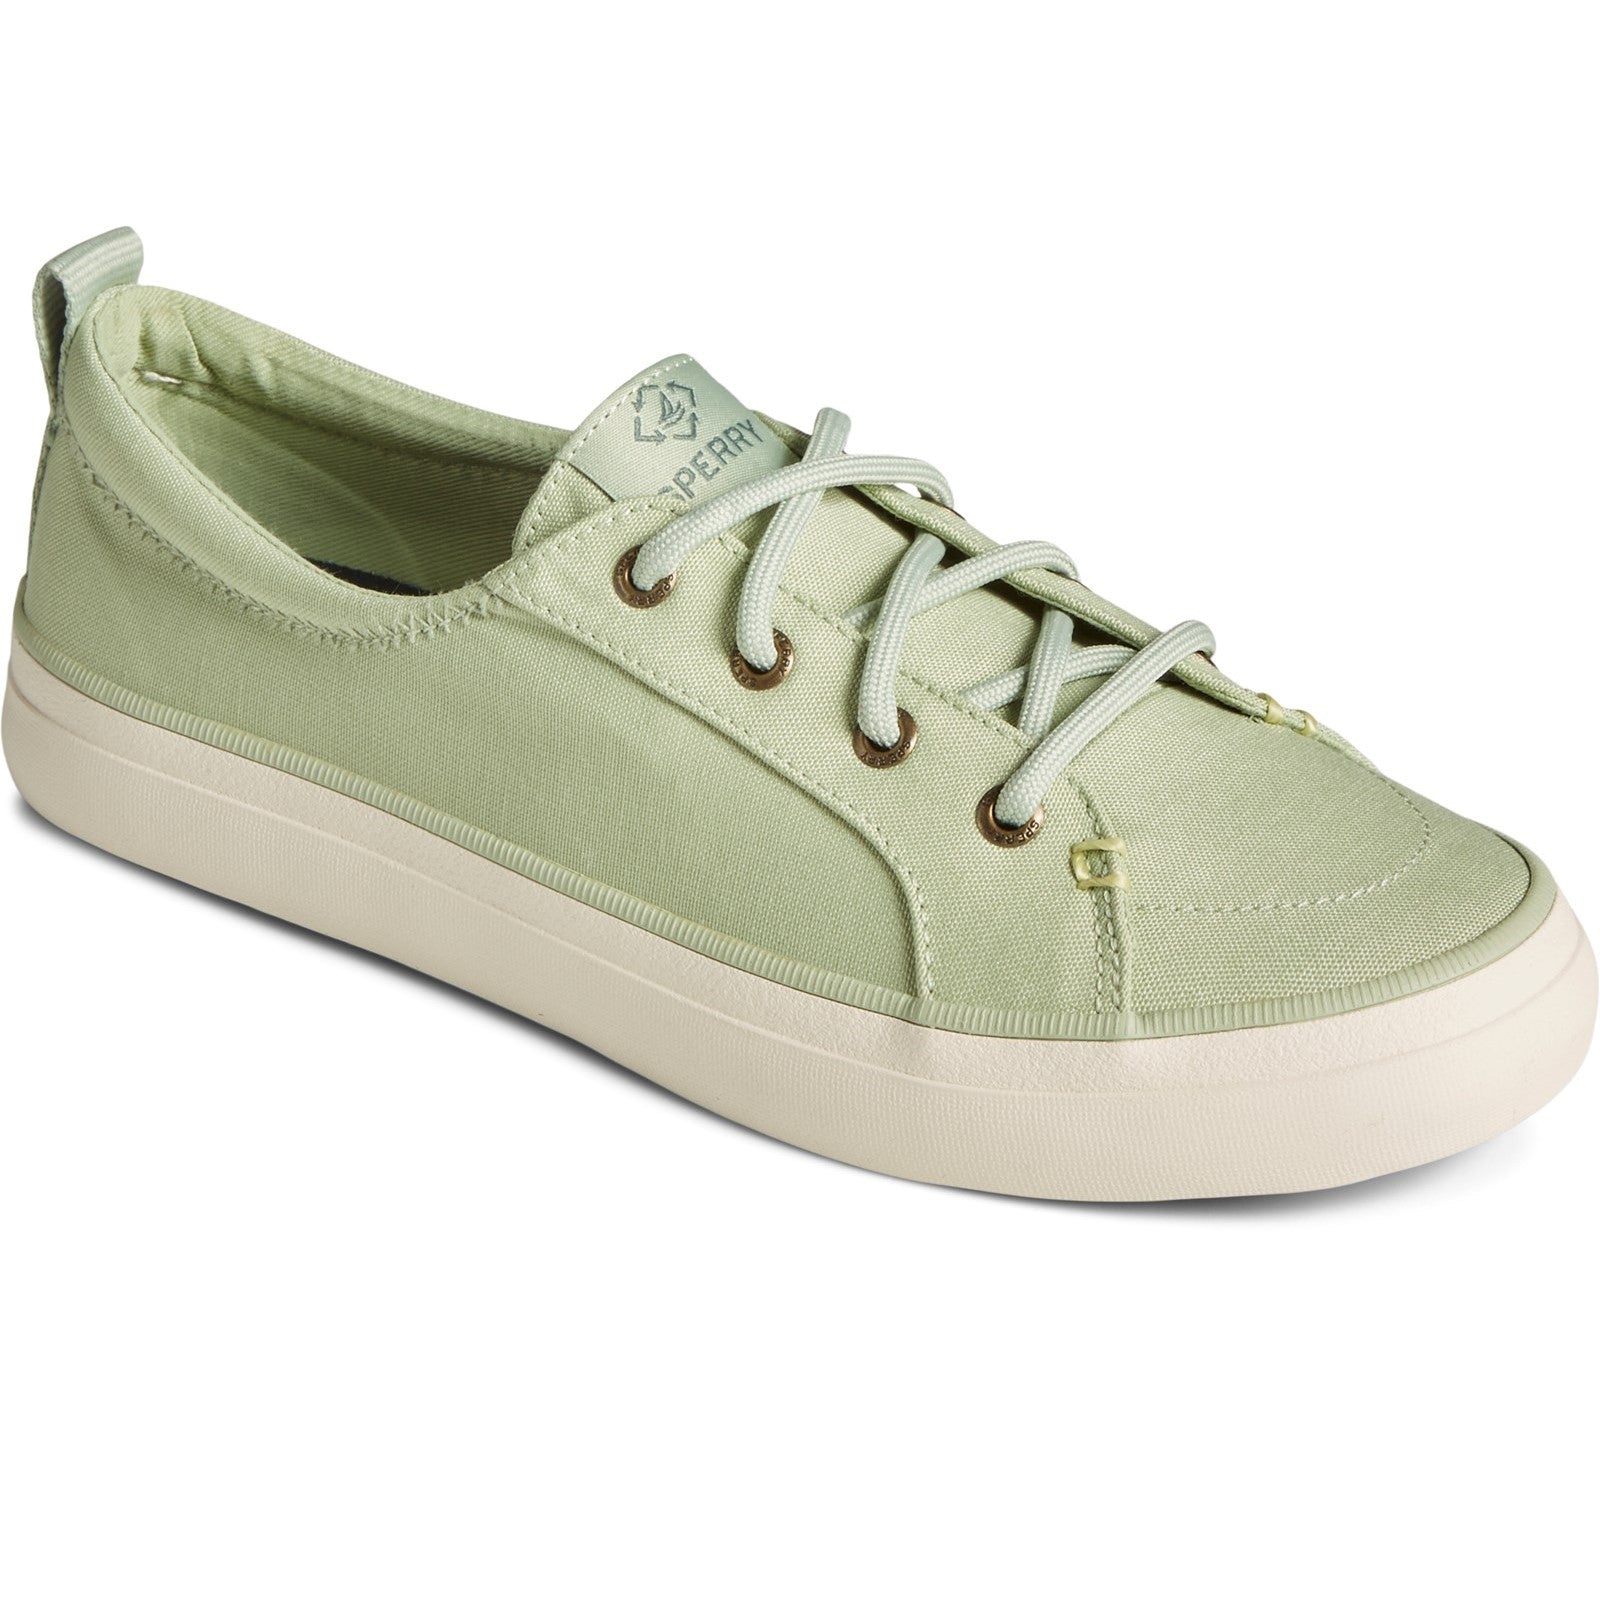 Sperry Womens Crest Vibe Trainers - Green